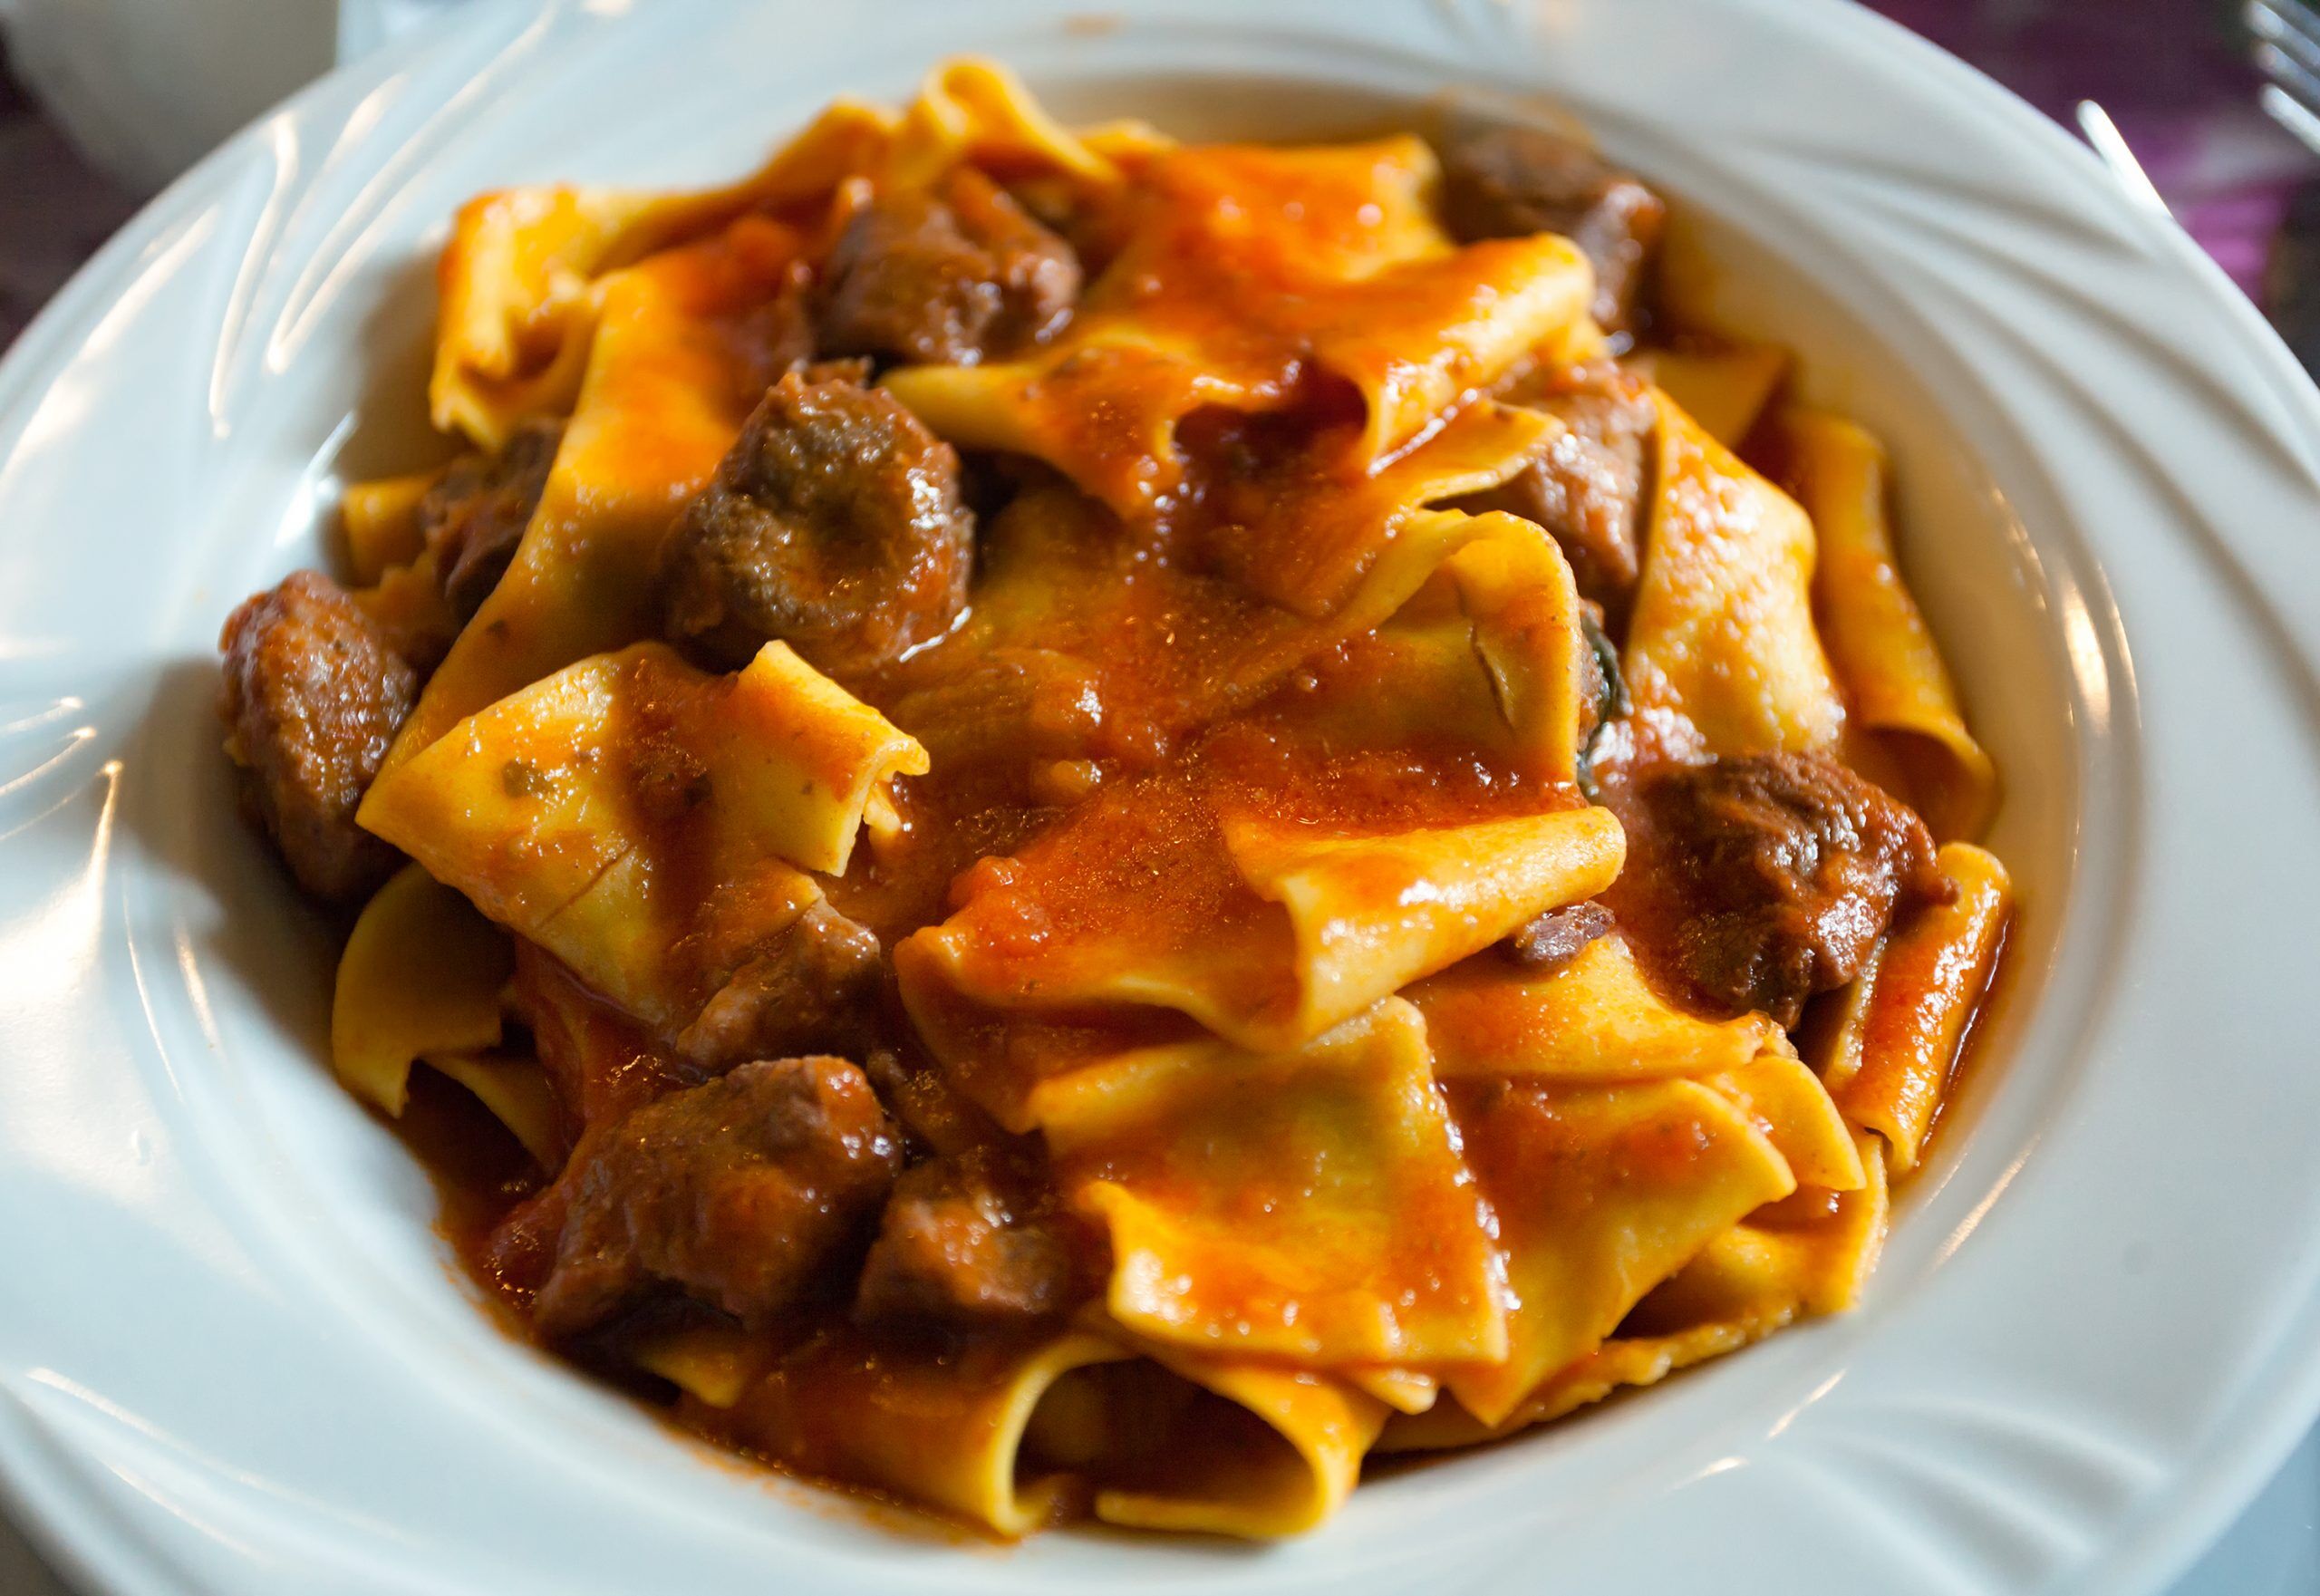 Pappardelle with boar ragù cinghiale pasta